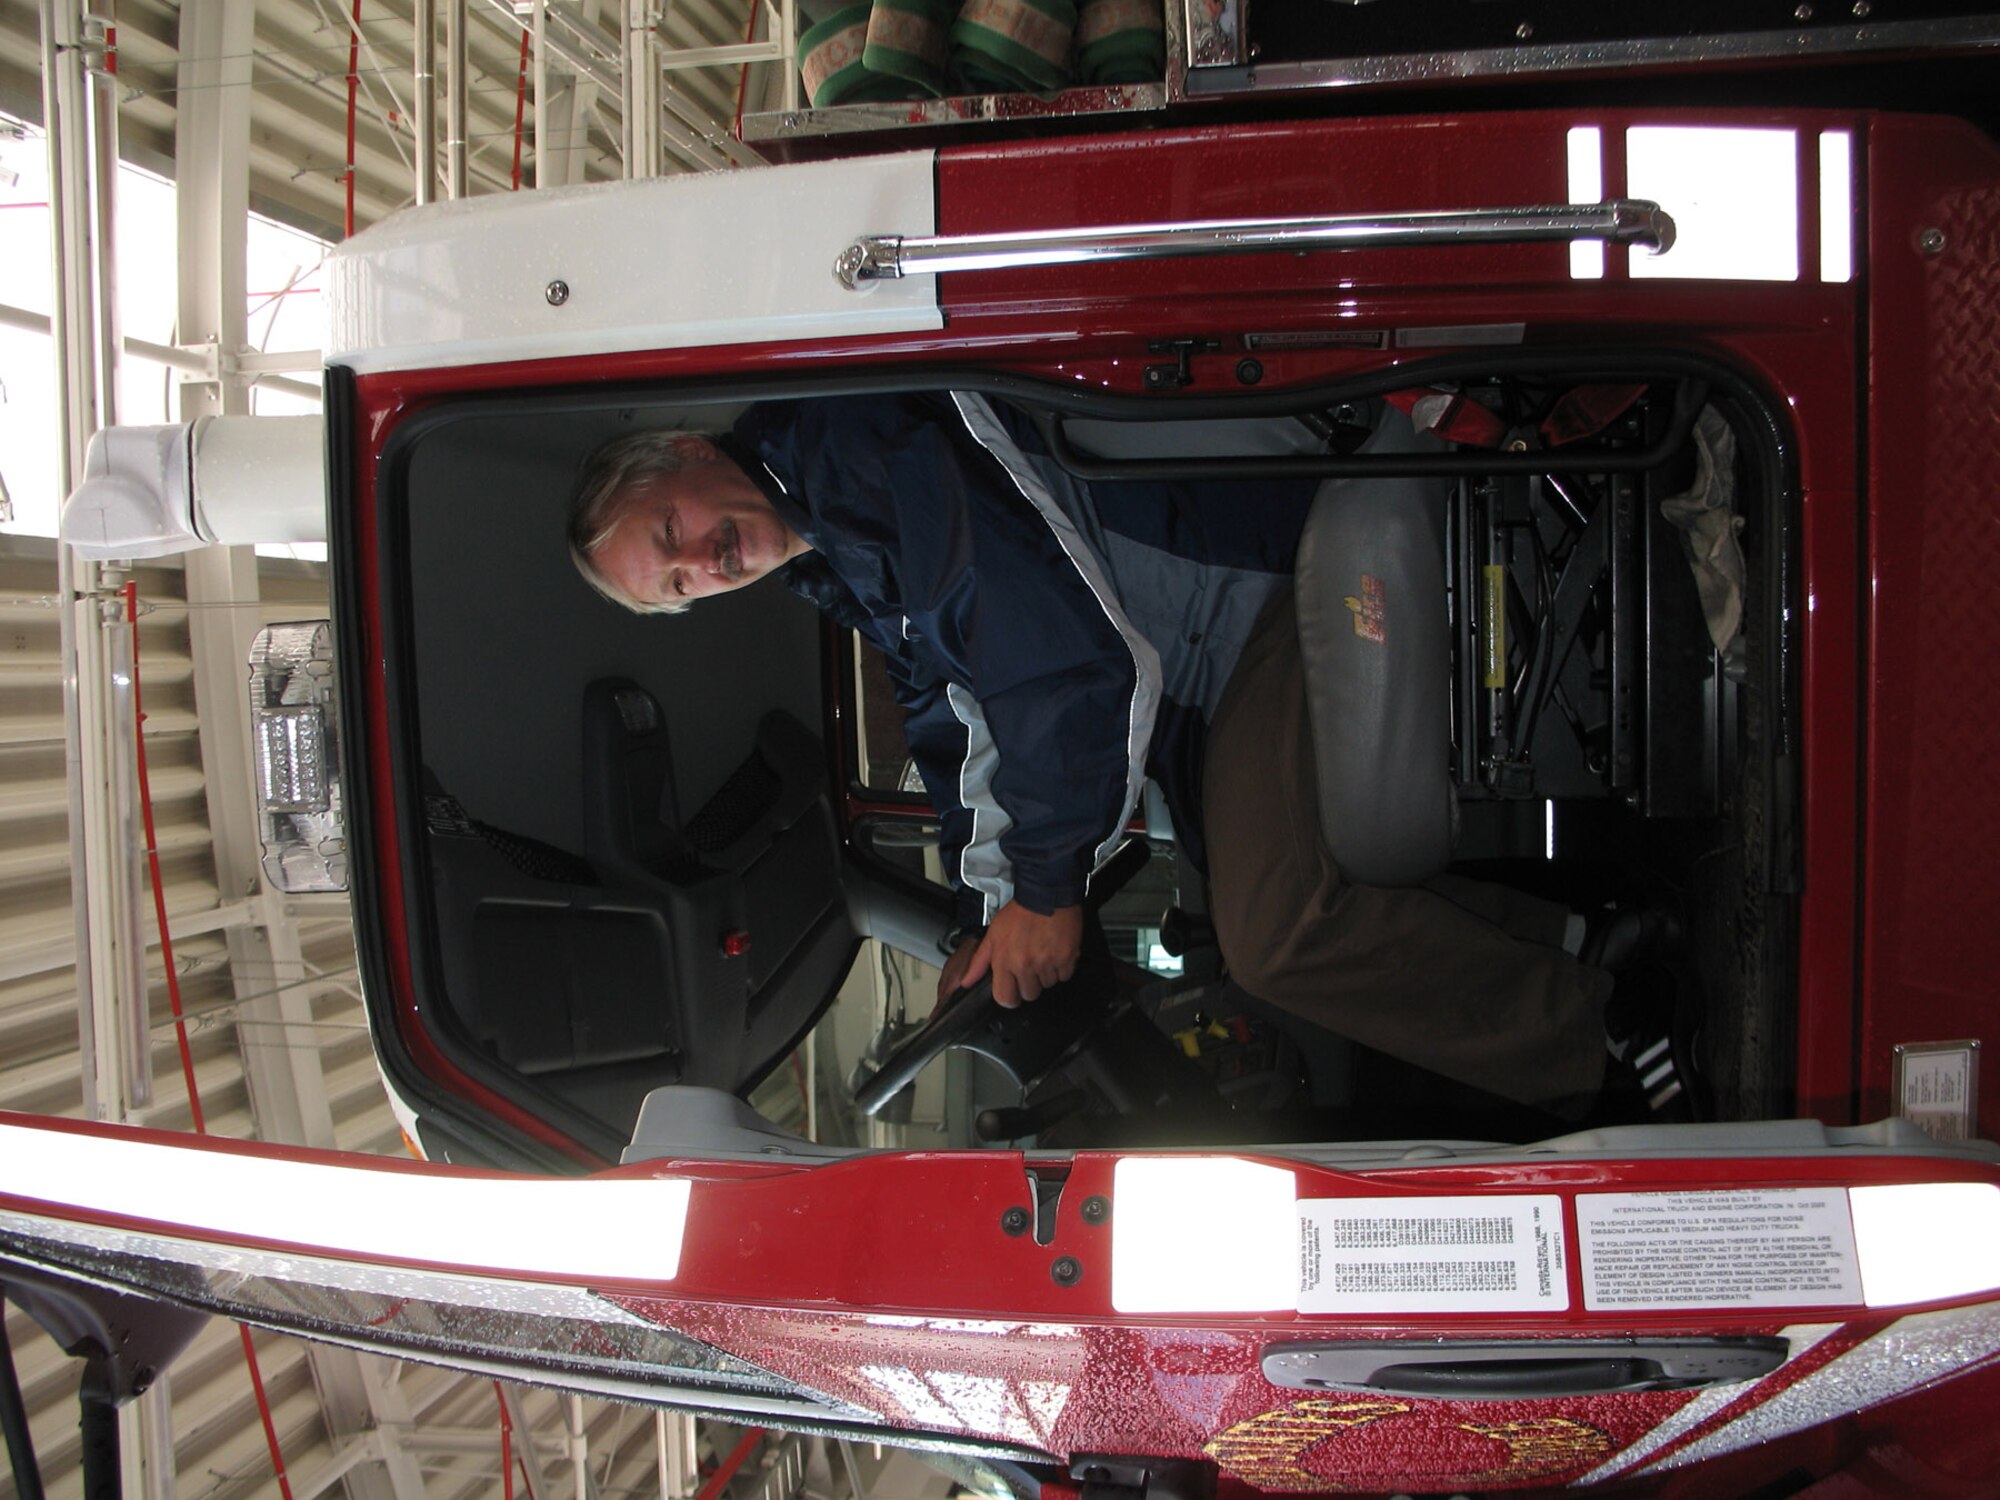 SPANGDAHLEM AIR BASE, Germany -- Heinz Ferring, Bitburg Police Station chief inspector, spends a moment in the cab of a Spangdahlem Air Base fire truck during the police station’s work outing Sept. 4, 2007. (U.S. Air Force photo/ Simone Chapman)